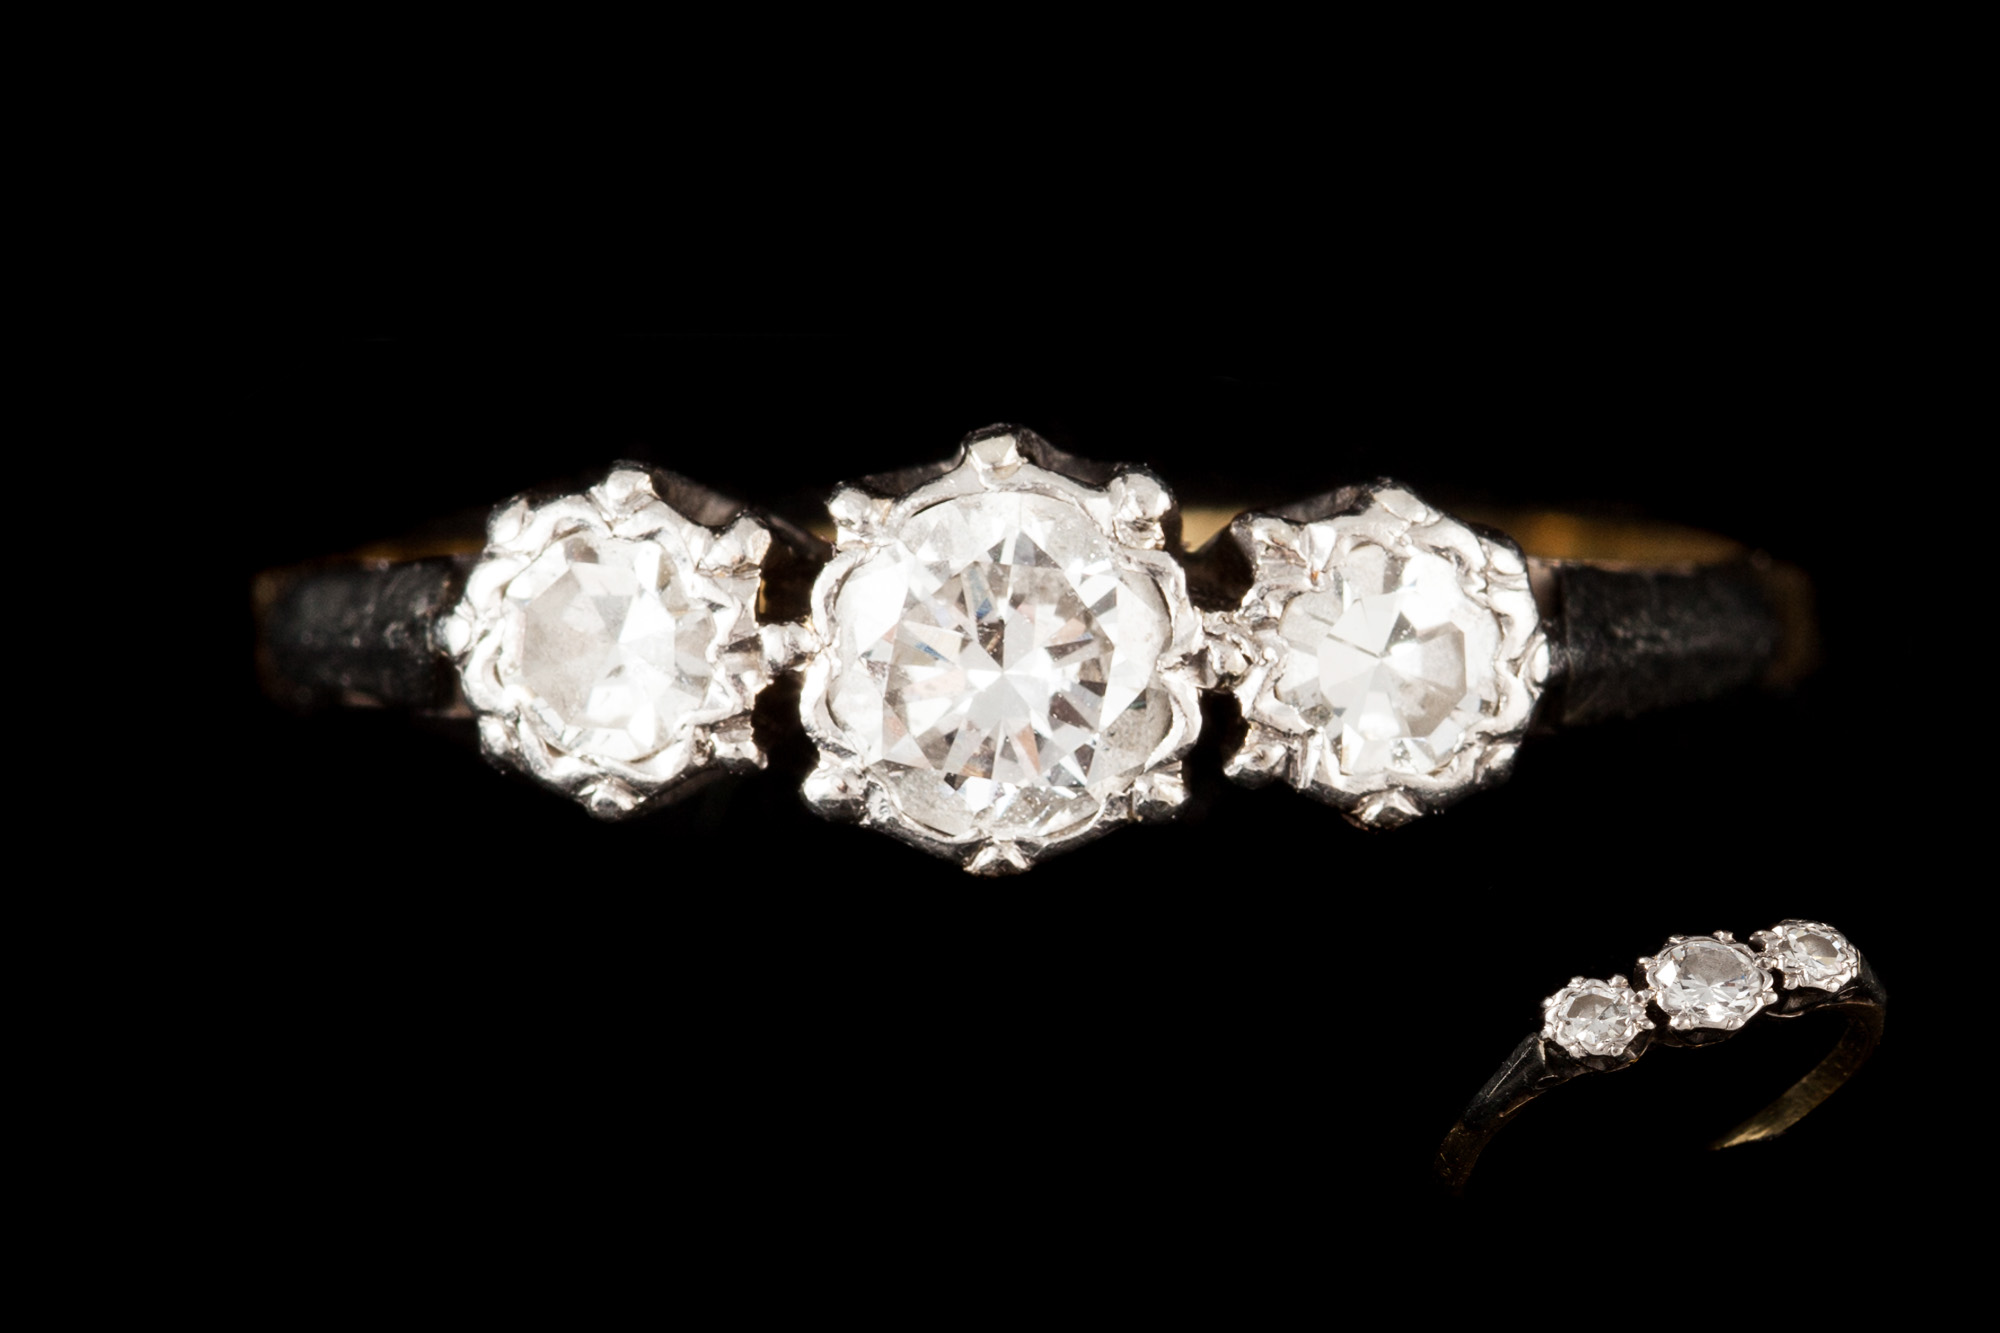 A THREE STONE DIAMOND RING, the brilliant cut diamonds mounted in 18ct gold and platinum.